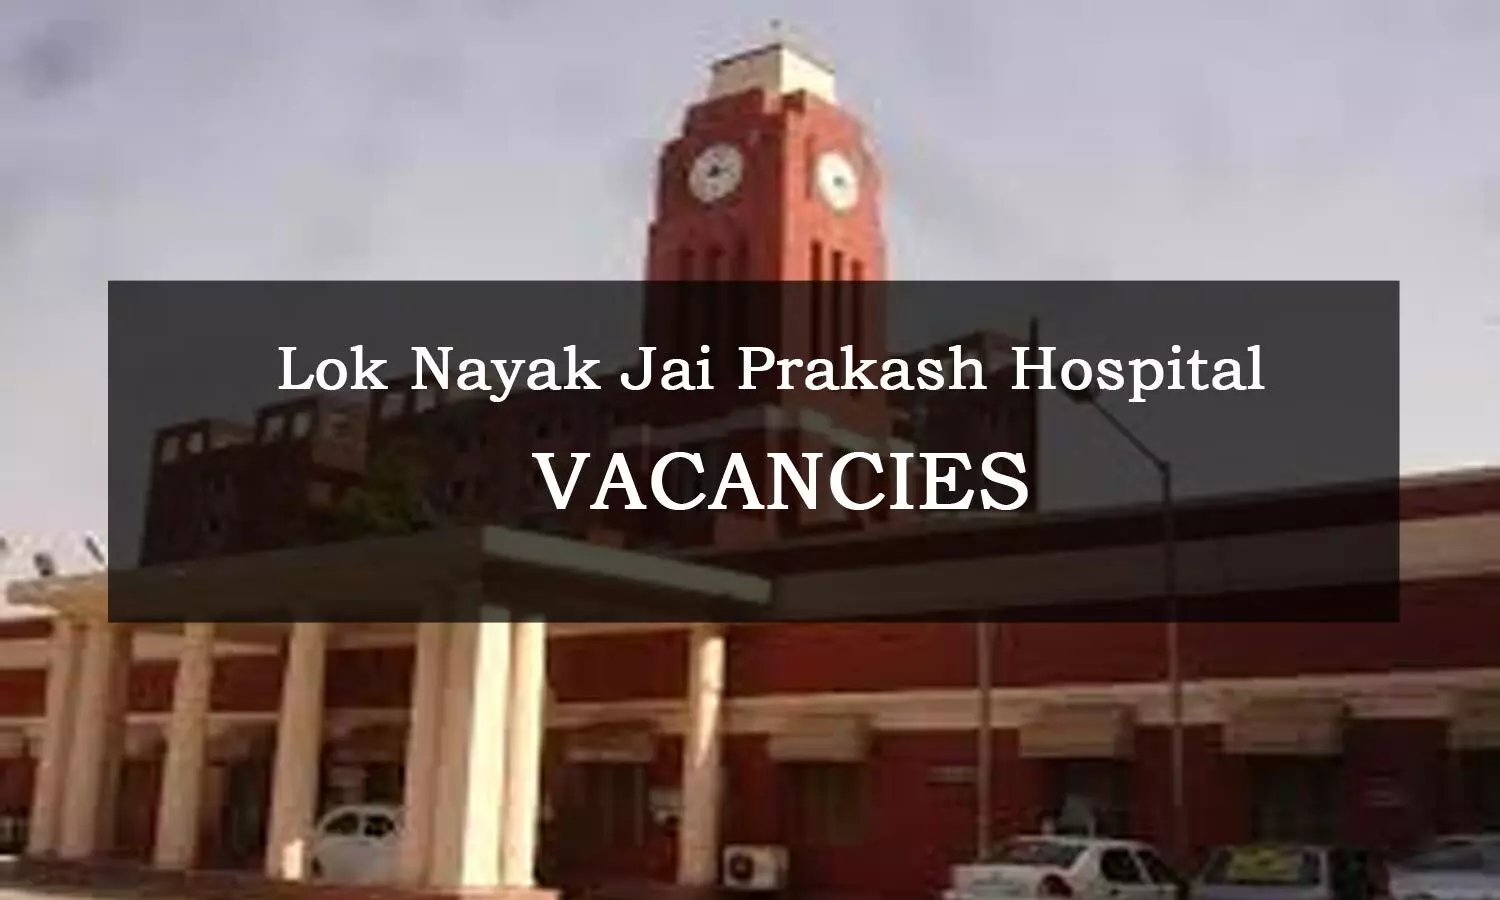 Walk-In-Interview: COVID ONLY LNJP Hospital Delhi Releases 39 Vacancies  For Senior Resident Post